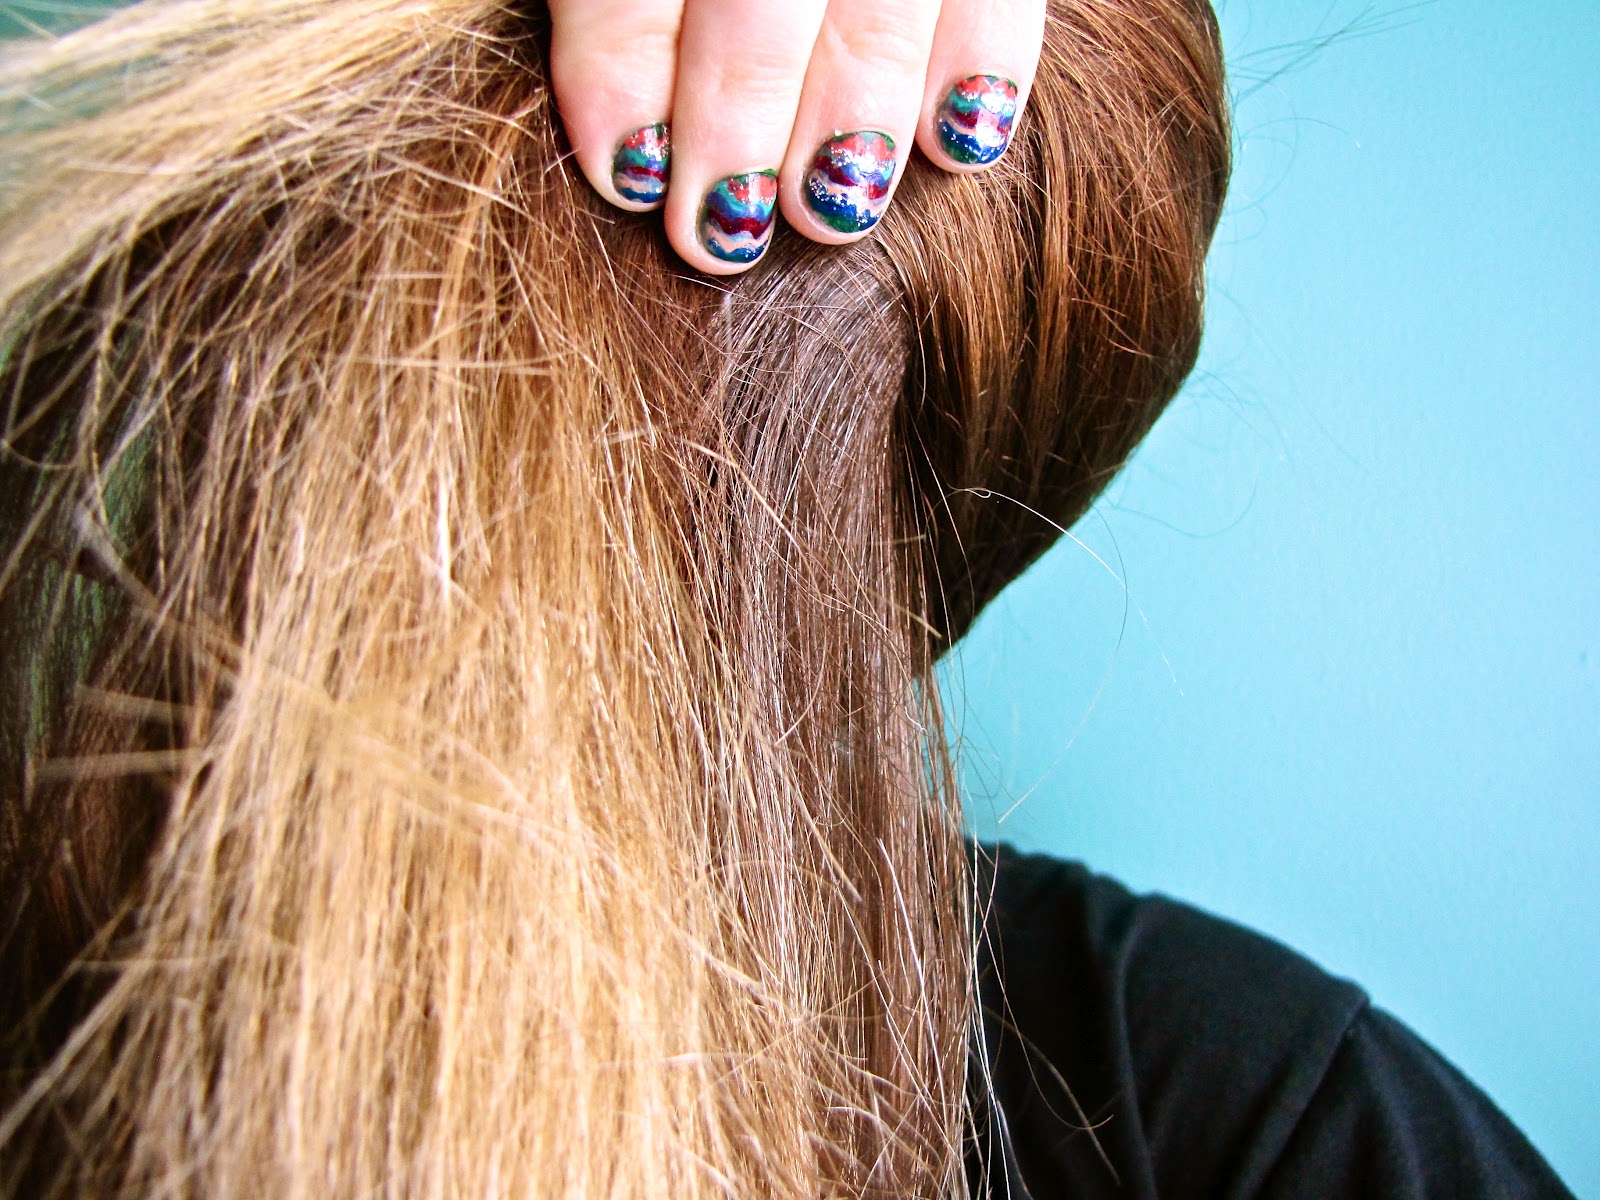 2. "Blue Hair with Turquoise Tips: Inspiration and Ideas" - wide 4